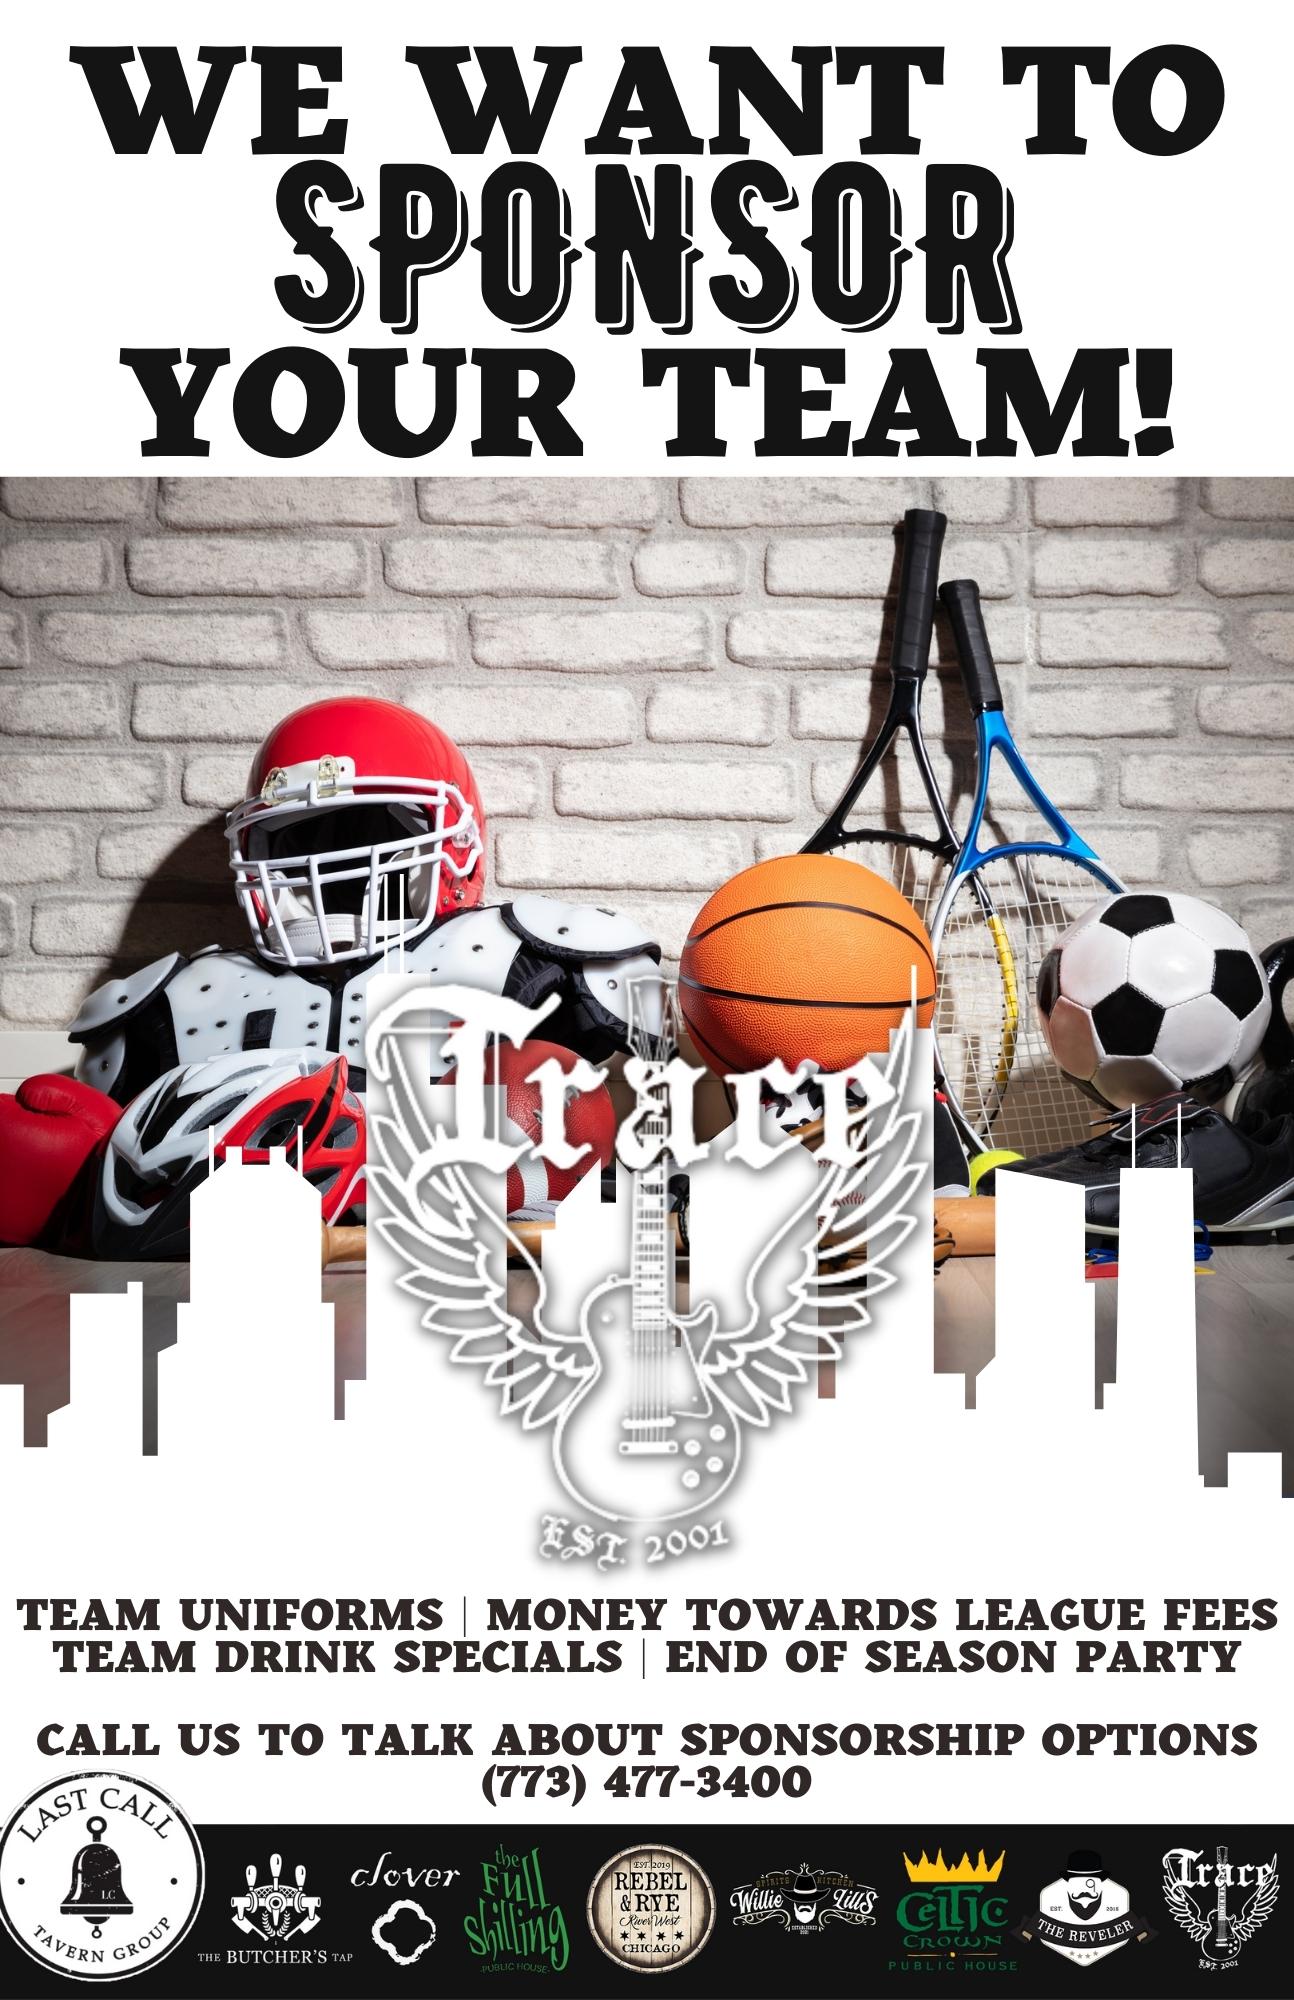 We Want to Sponsor Your Team!